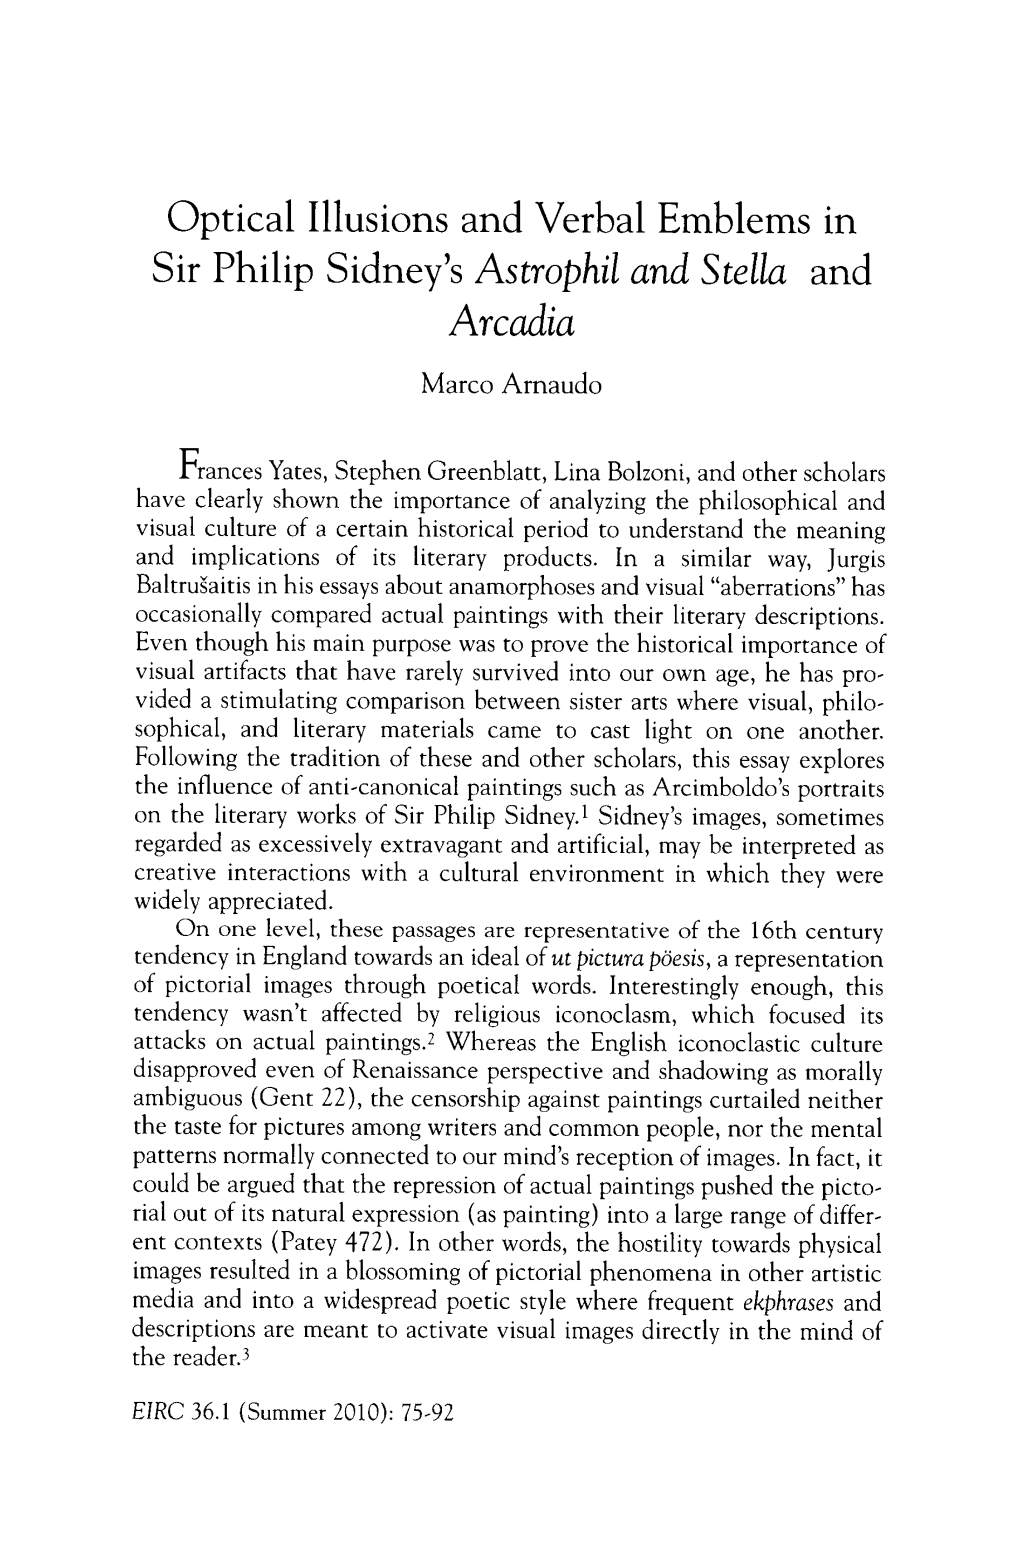 Sir Philip Sidney's Astrophil and Stella and Arcadia